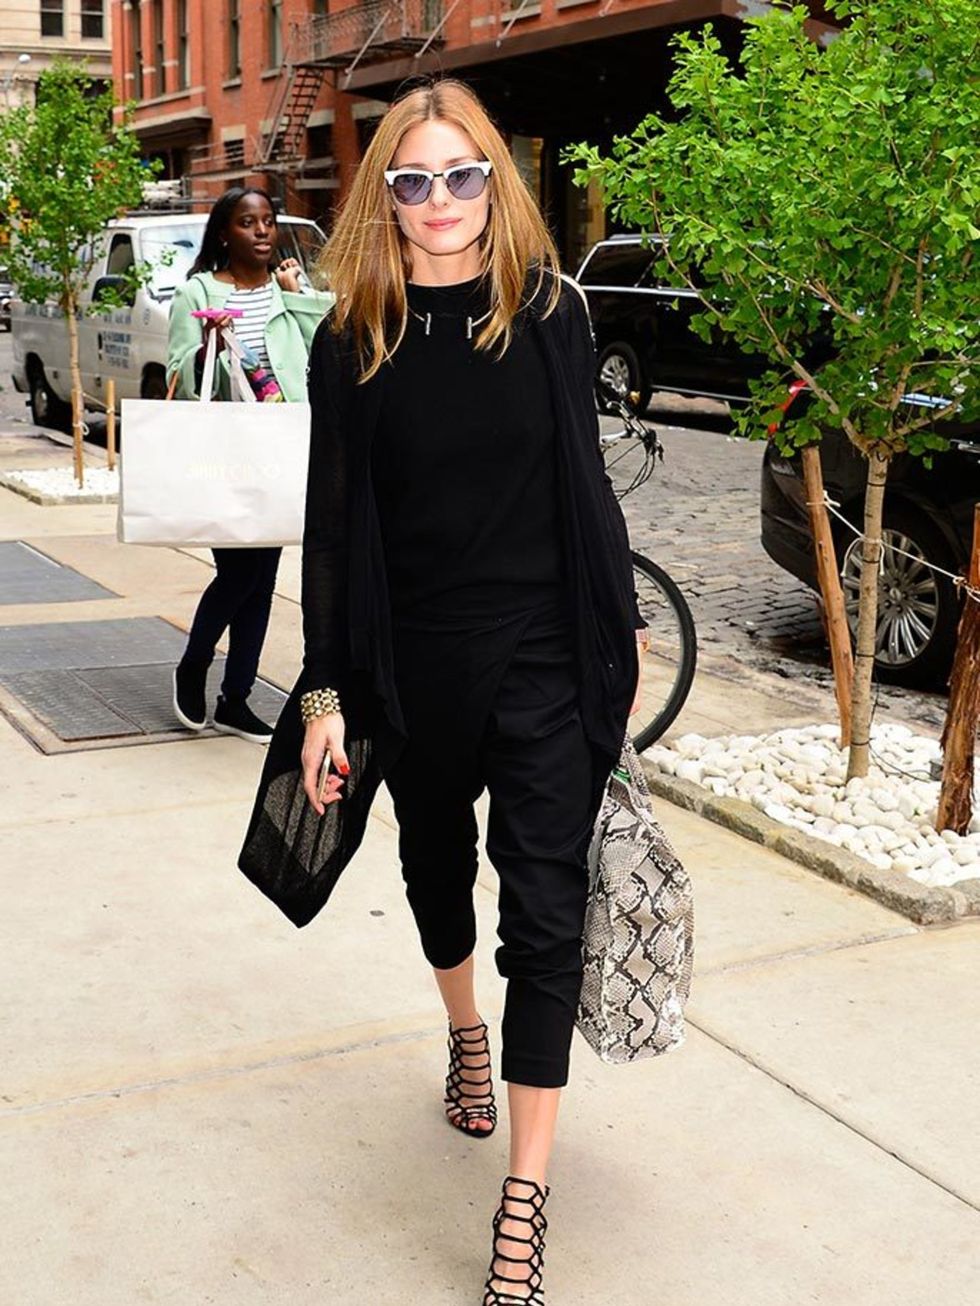 Olivia Palermo wearing all black whilst out and about in New York, May 2015.